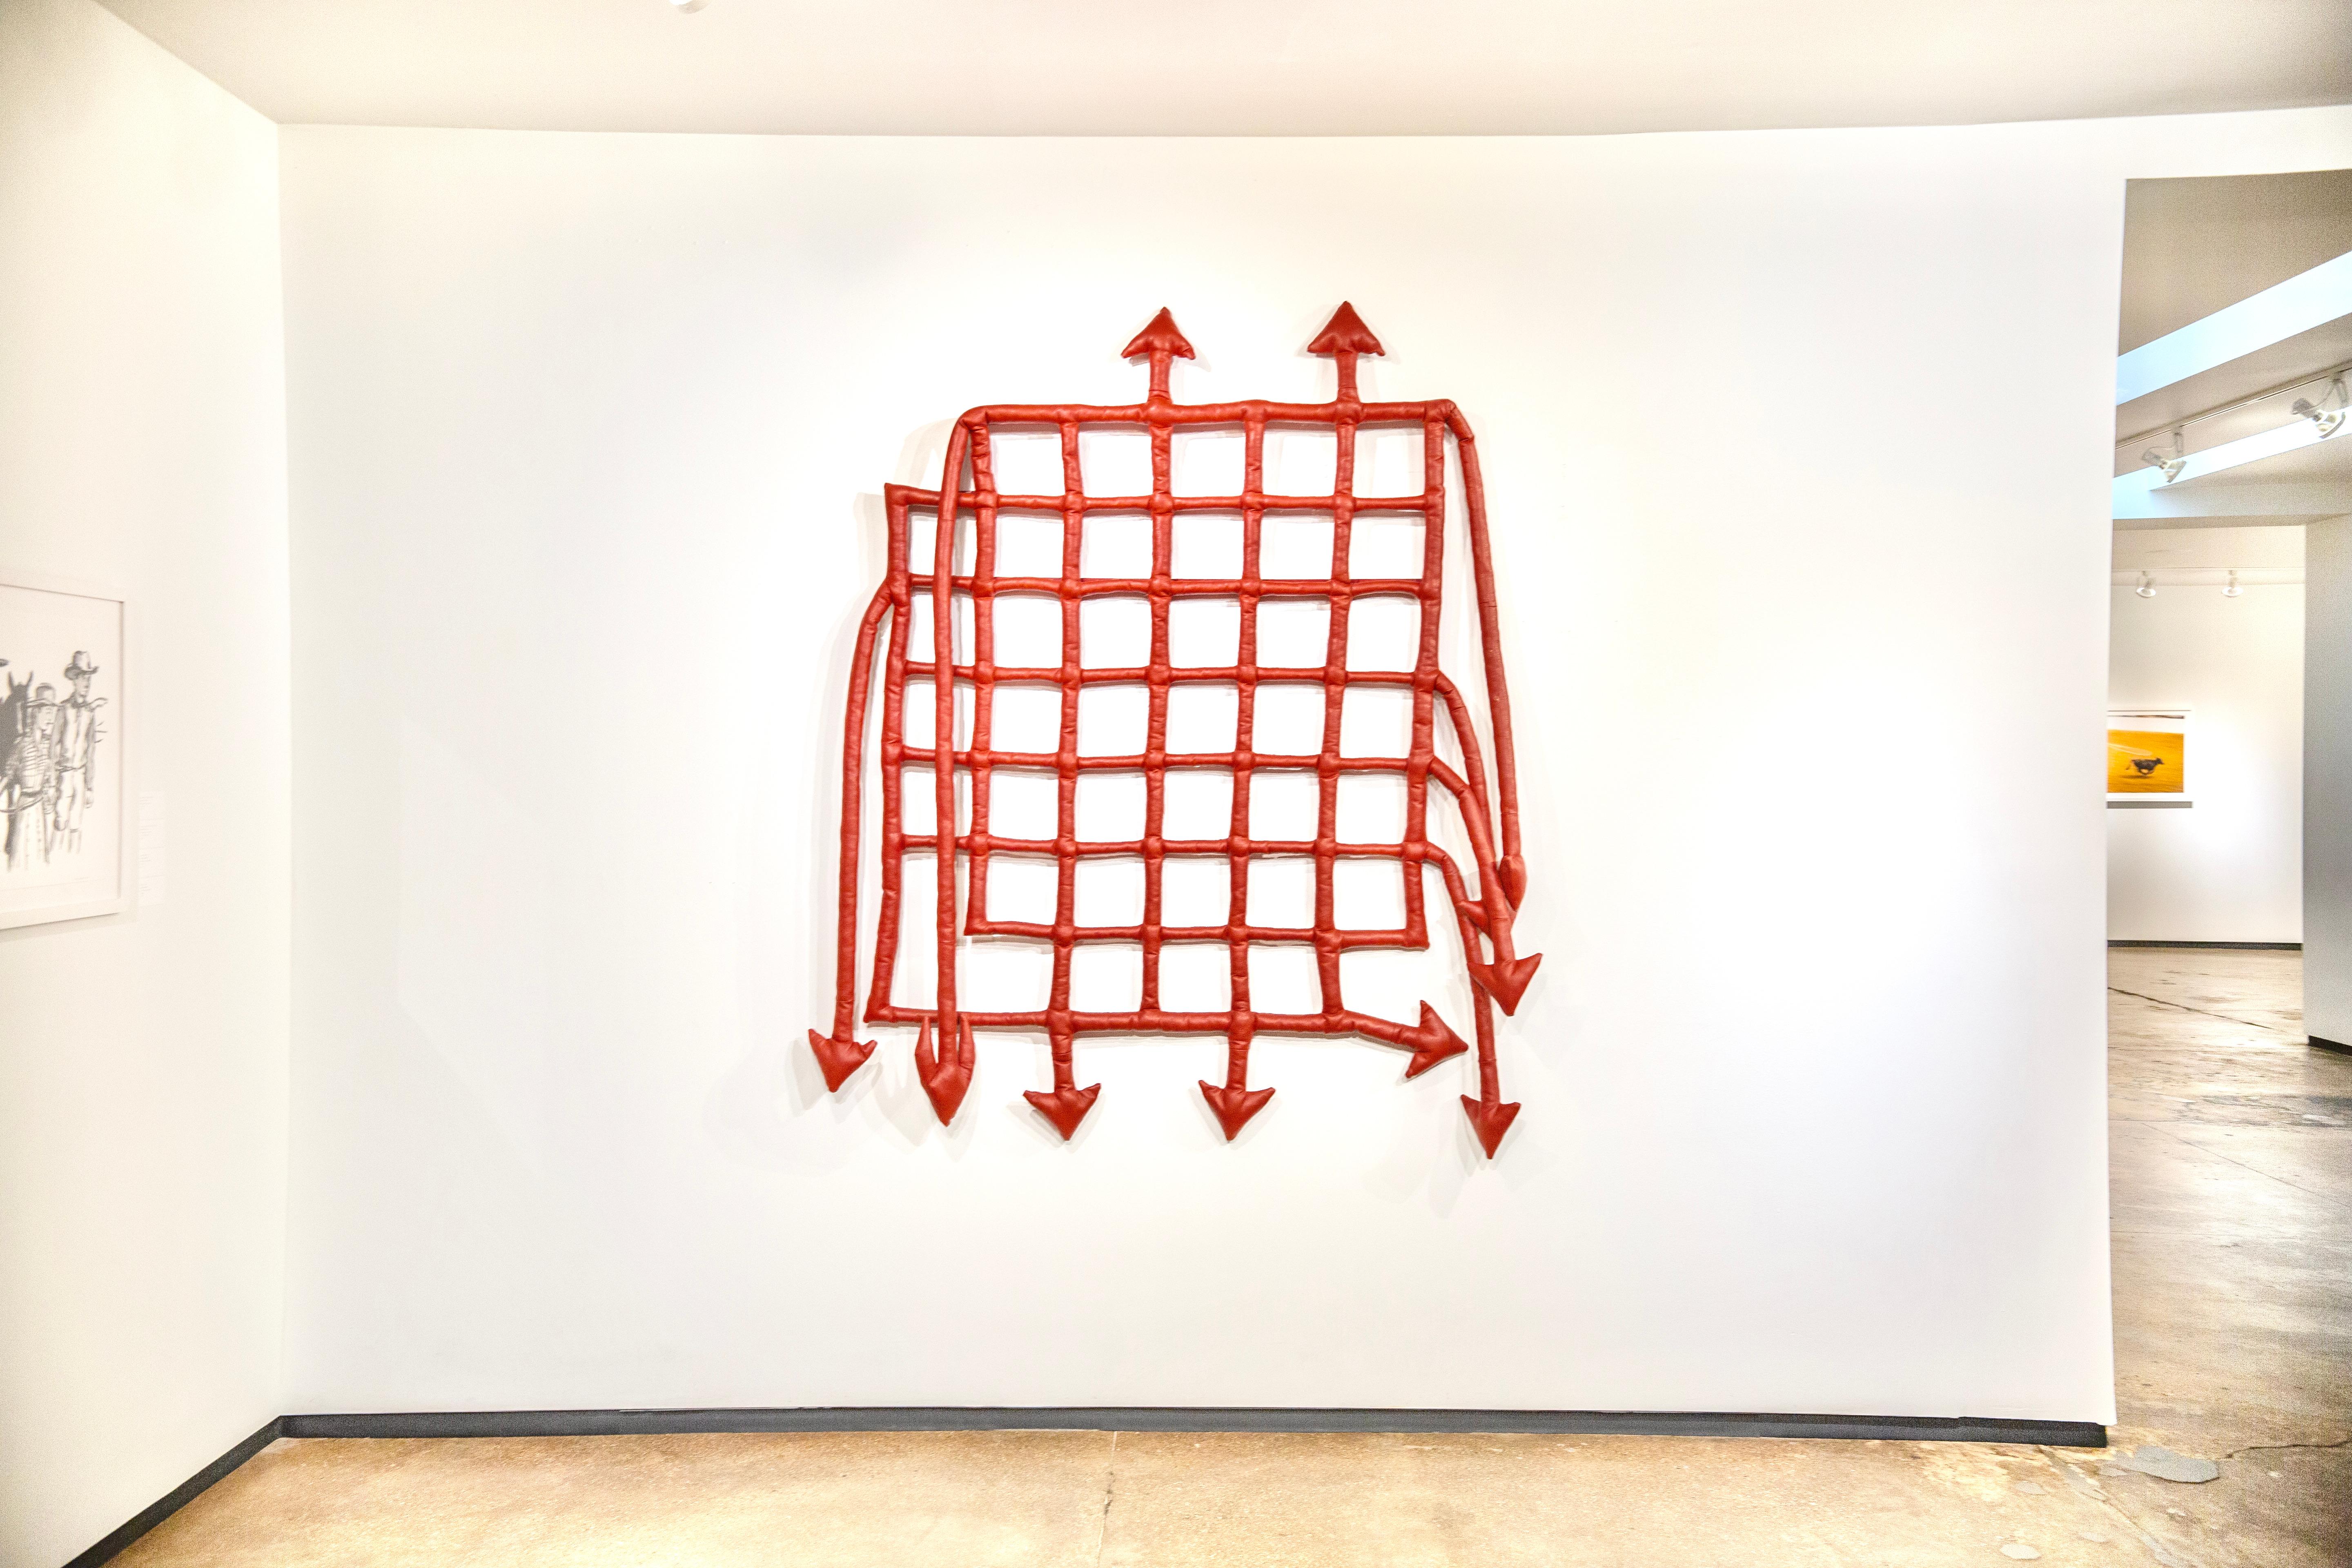 Large Crimson Fabric/Vinyl Soft Sculpture with Arrows and Grid Pattern - Mixed Media Art by Martha Elena